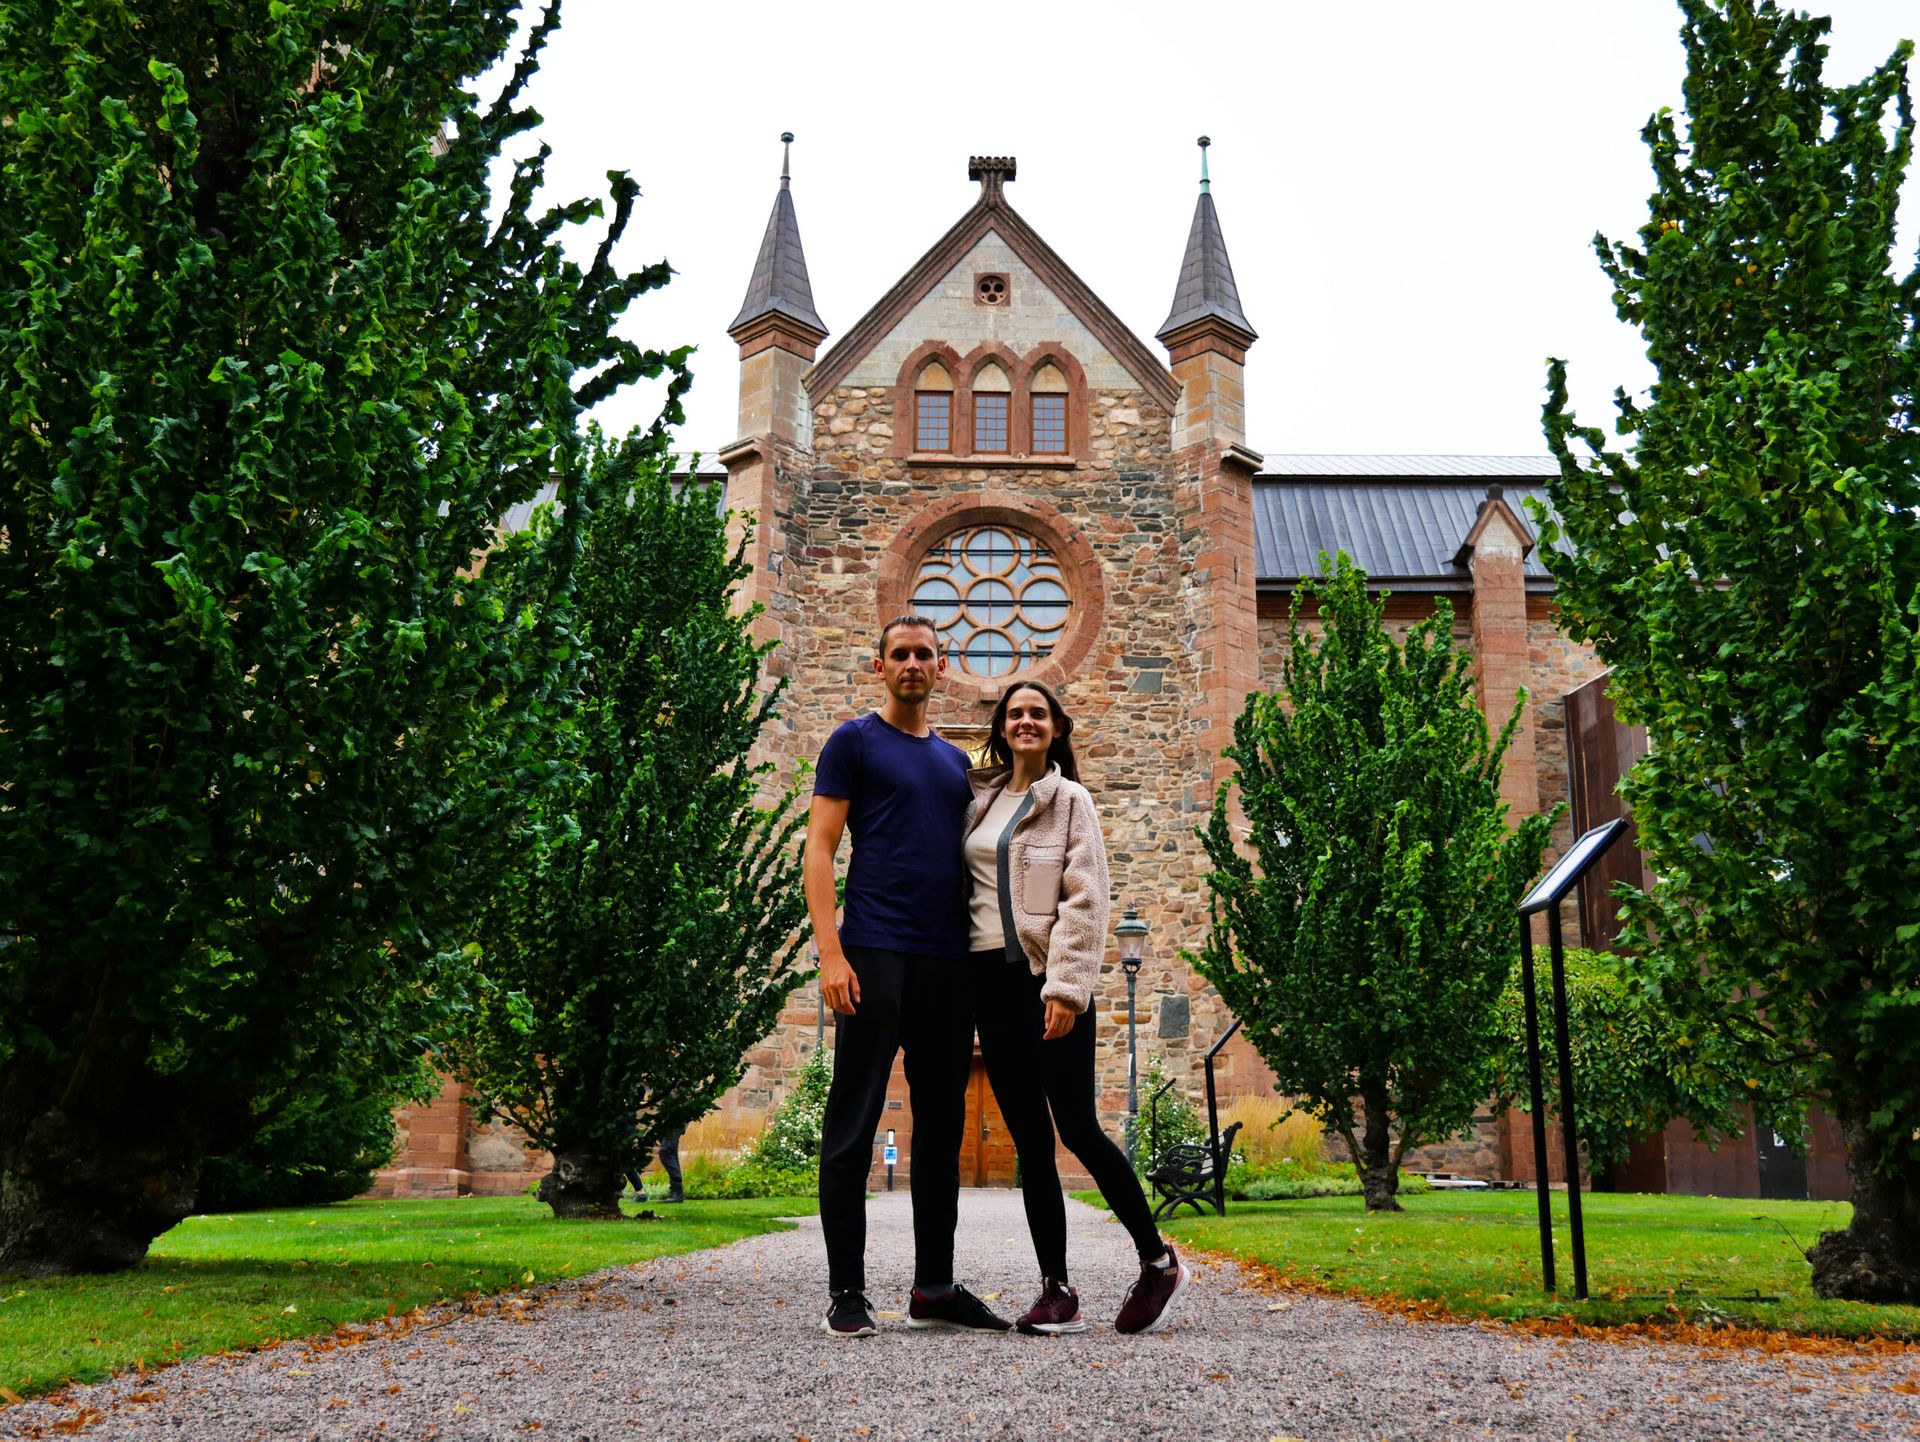 A couple with an old church in the background.